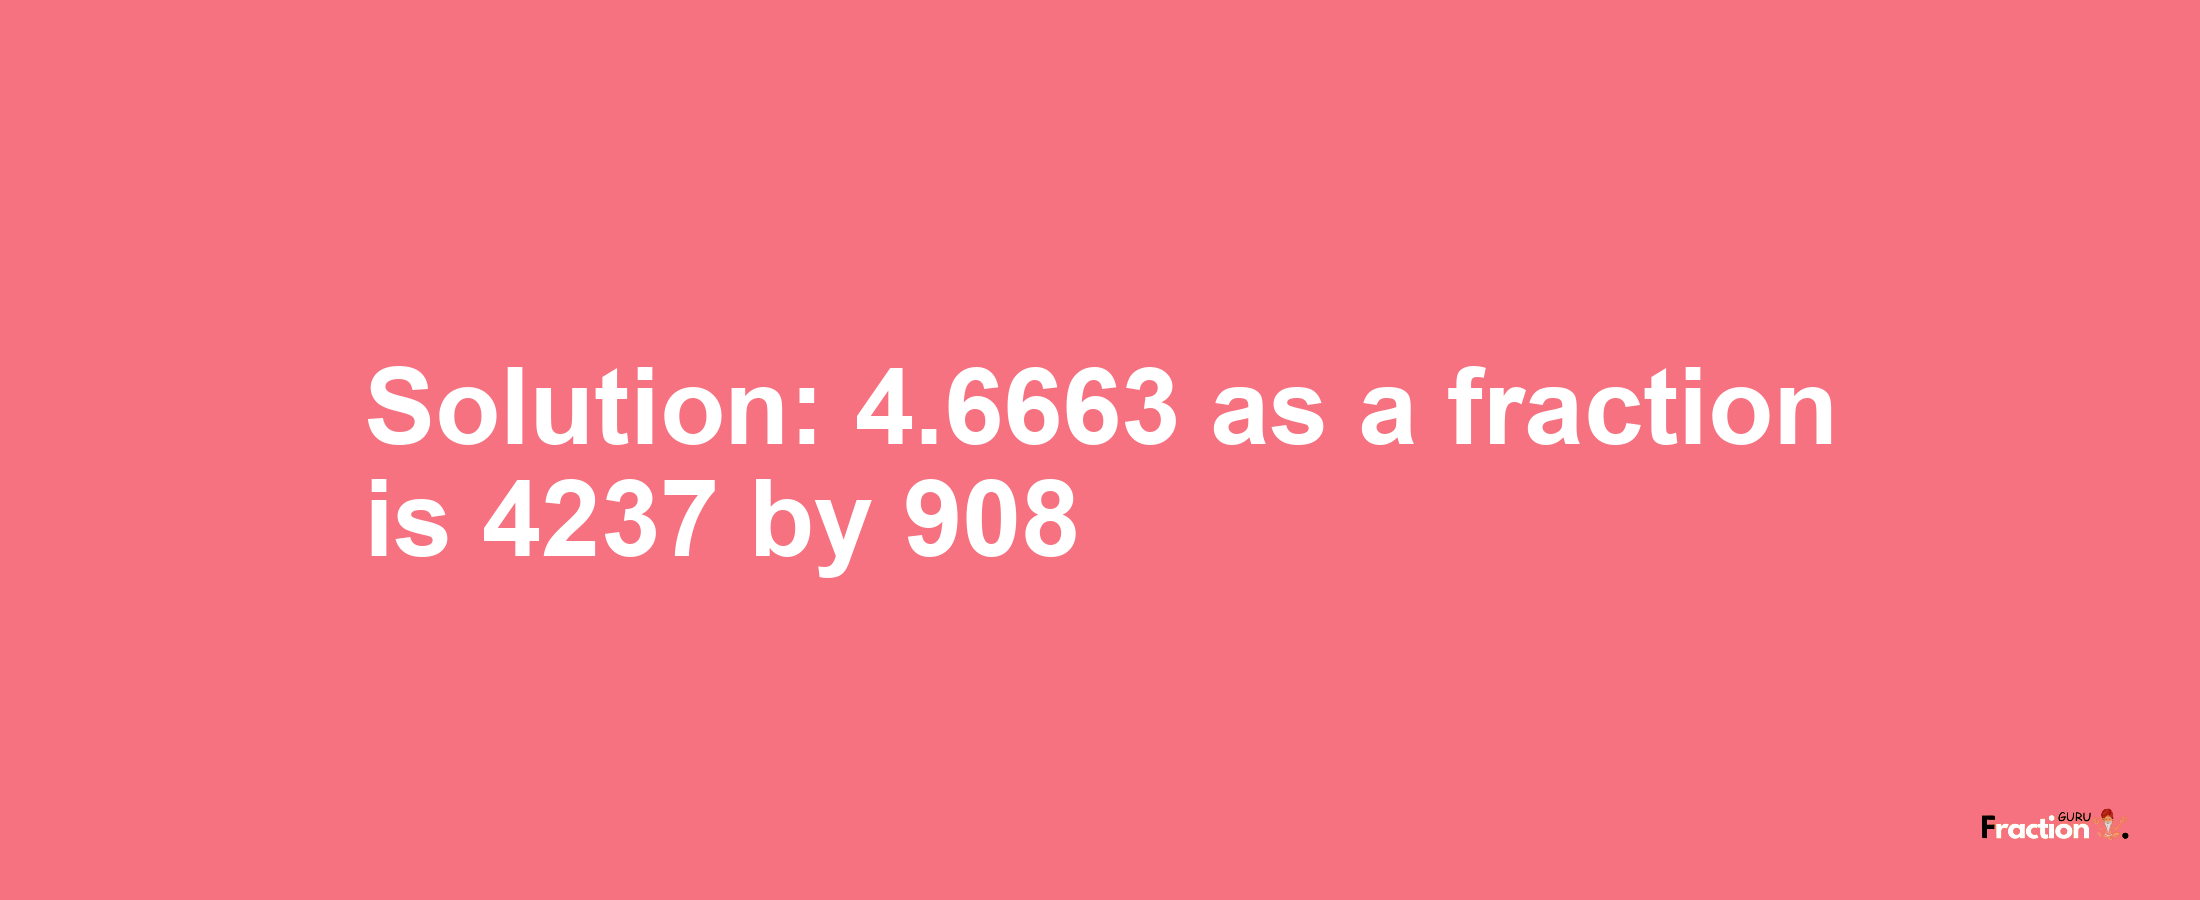 Solution:4.6663 as a fraction is 4237/908